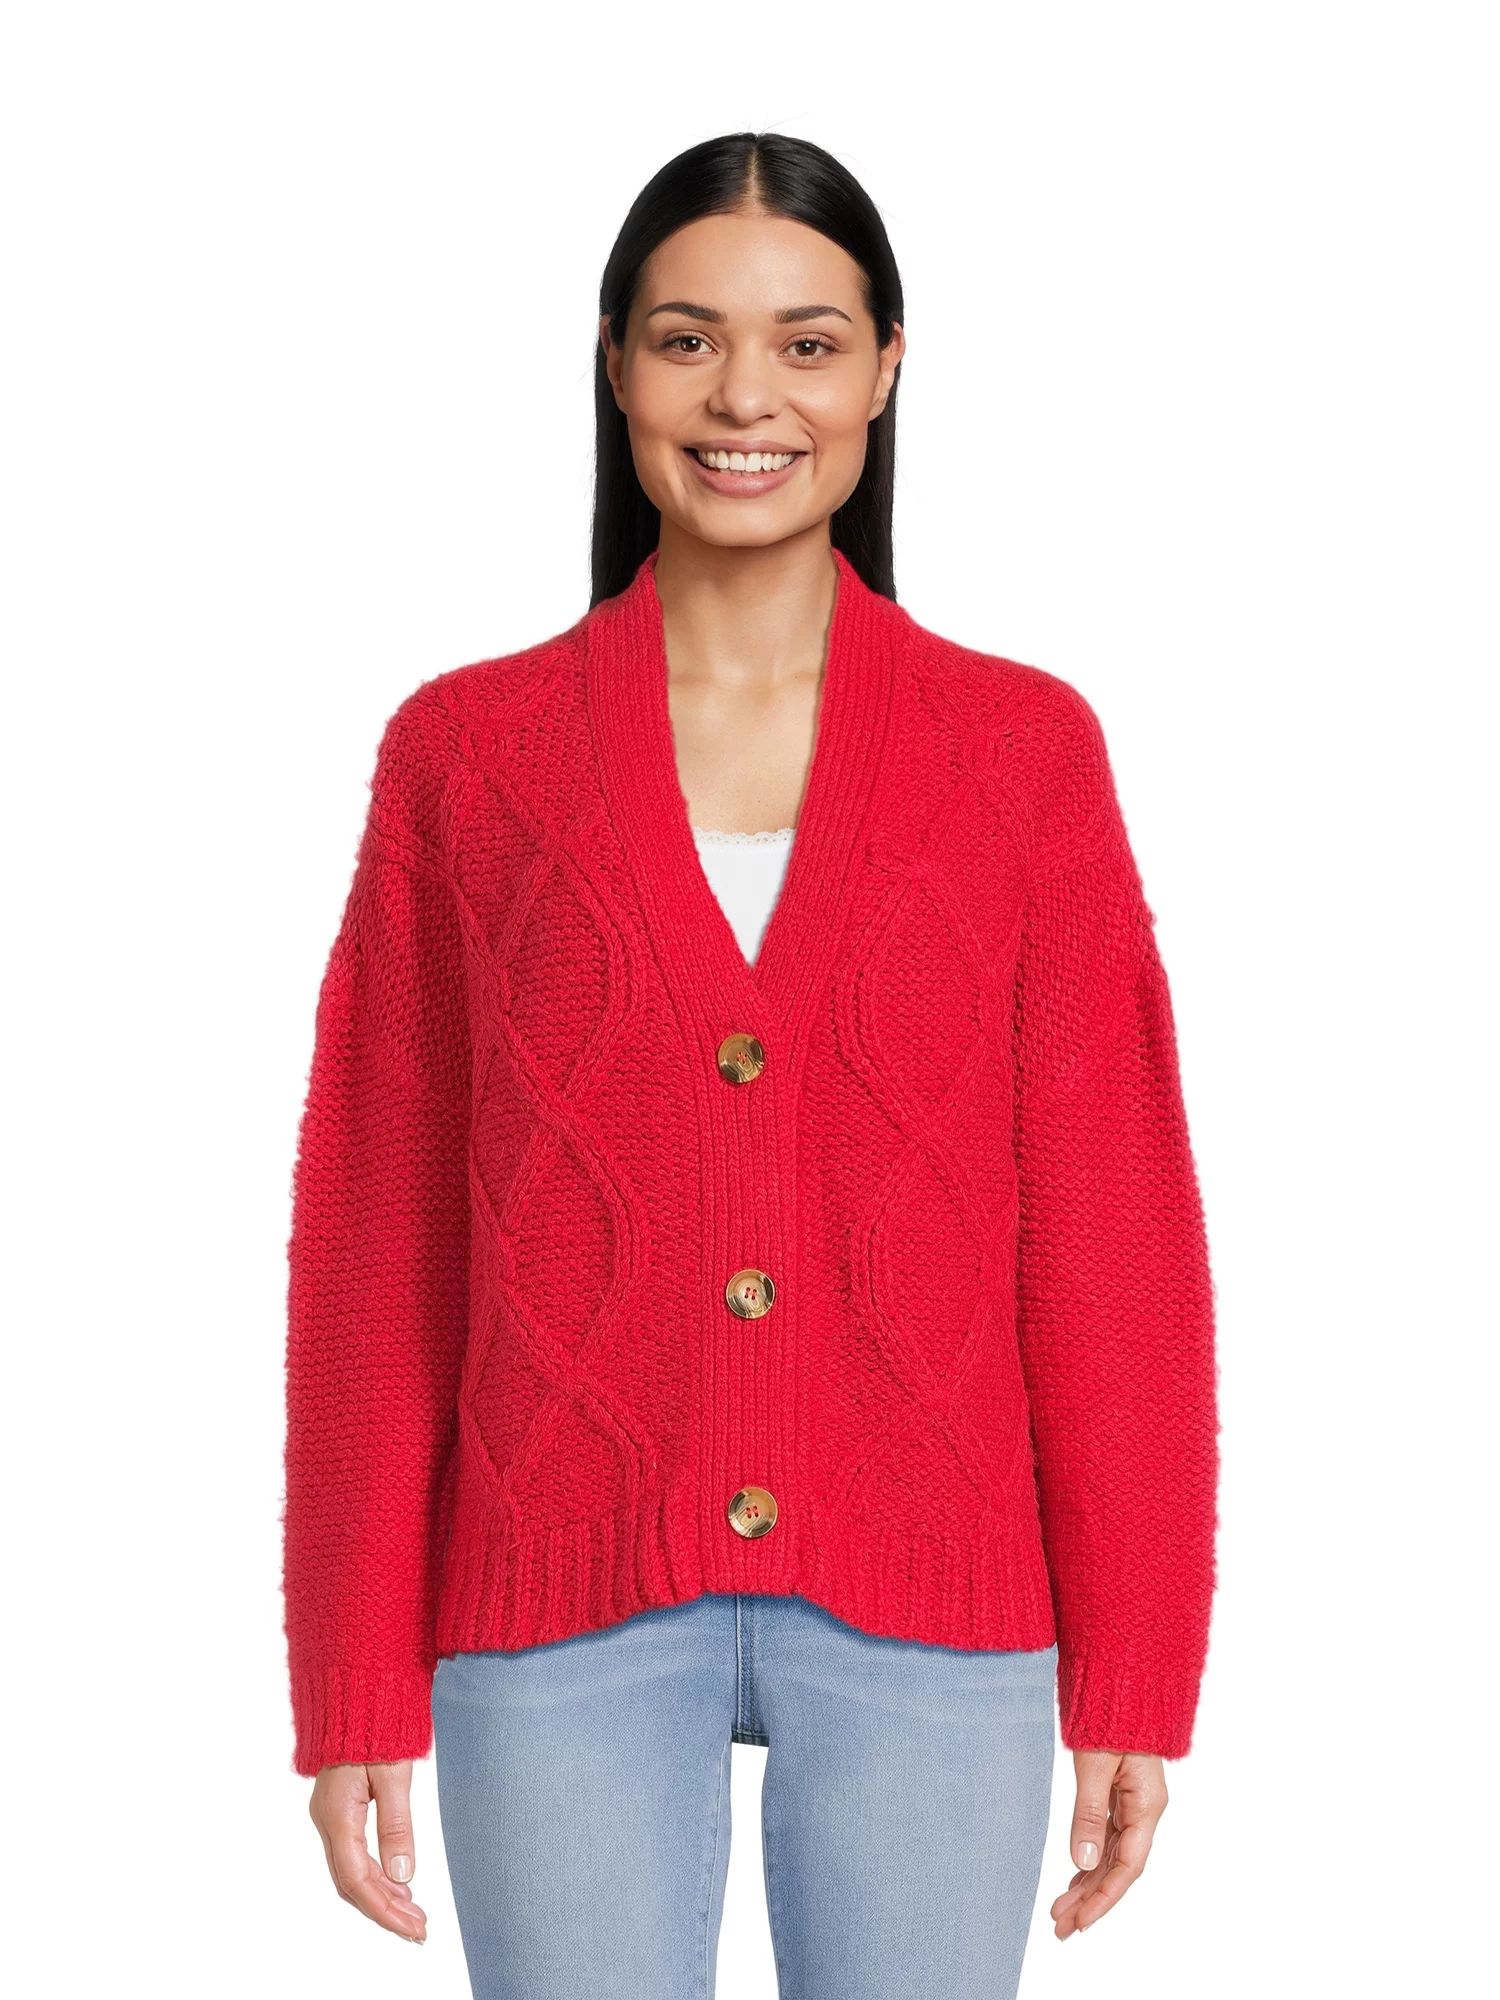 RD Style Women’s Cable Knit Cardigan, Sizes S-3XL | Walmart (US)